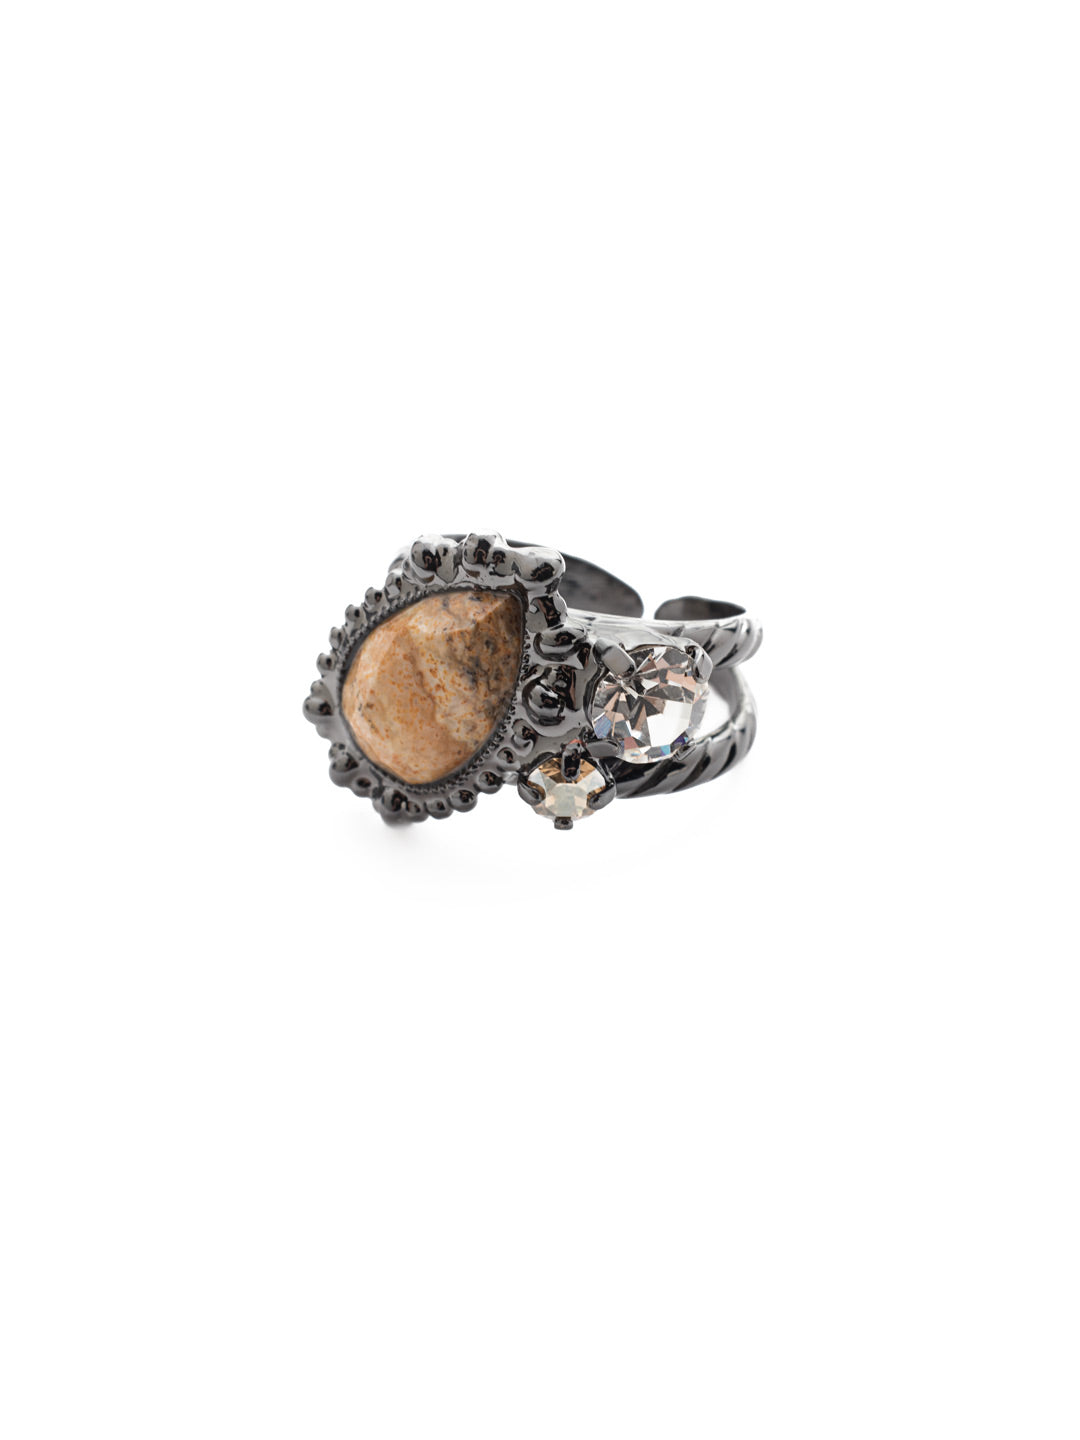 Henrietta Band Ring - REU15GMGNS - Our Henrietta Band Ring can be adjusted to fit any finger to add some edge to an outfit. If features a bold pear-shaped stone and round signature Sorrelli crystals. From Sorrelli's Golden Shadow collection in our Gun Metal finish.